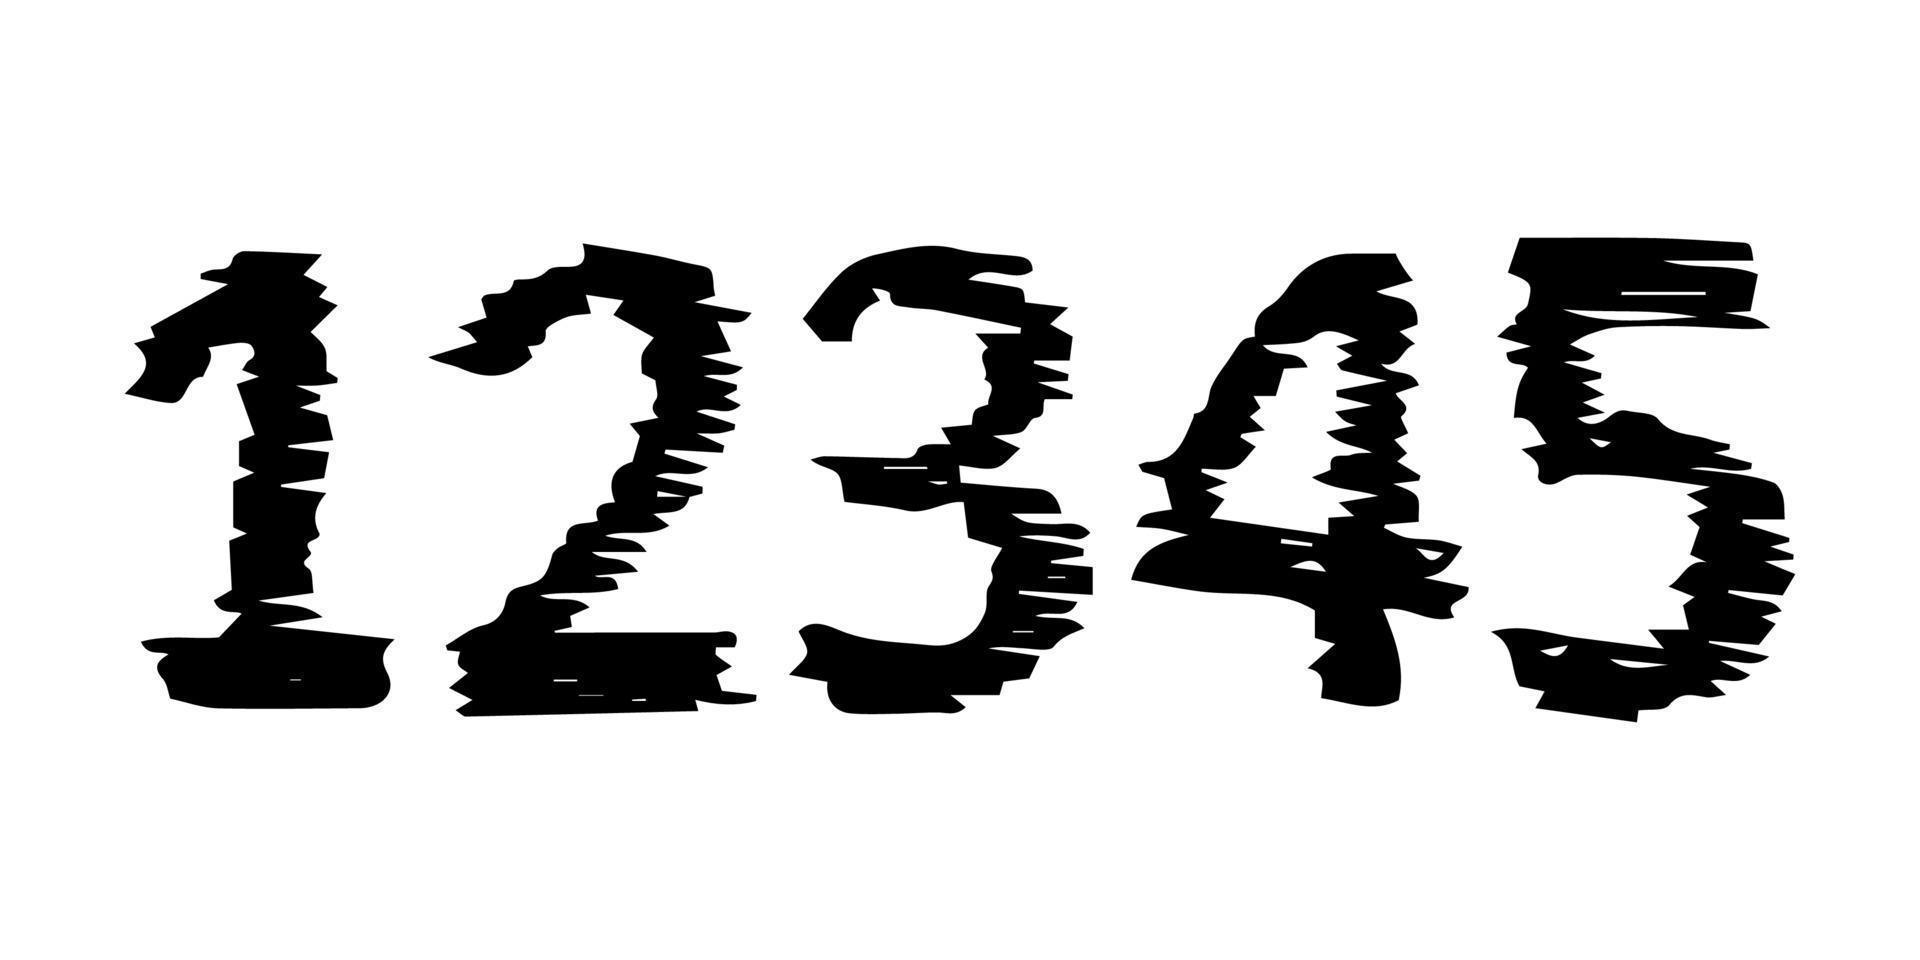 Hand Drawn Numbers 12345. Uppercase modern font and typeface. Black symbols on white background. Vector illustration.